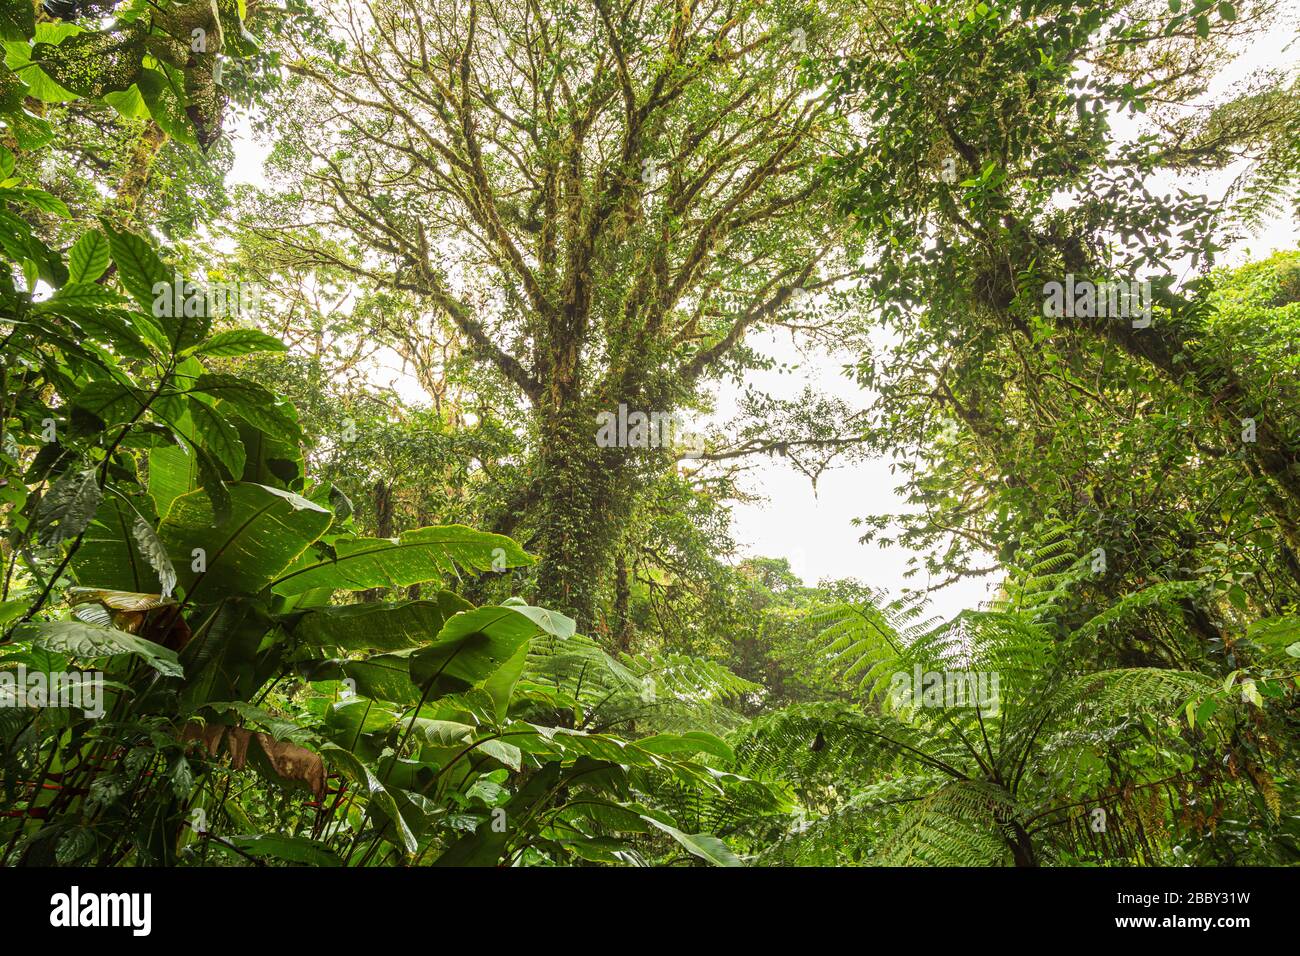 Trees, ferns, and epiphytes dominate the landscape at the Santa Elena Cloud Forest Reserve in Monteverde, Costa Rica. Stock Photo